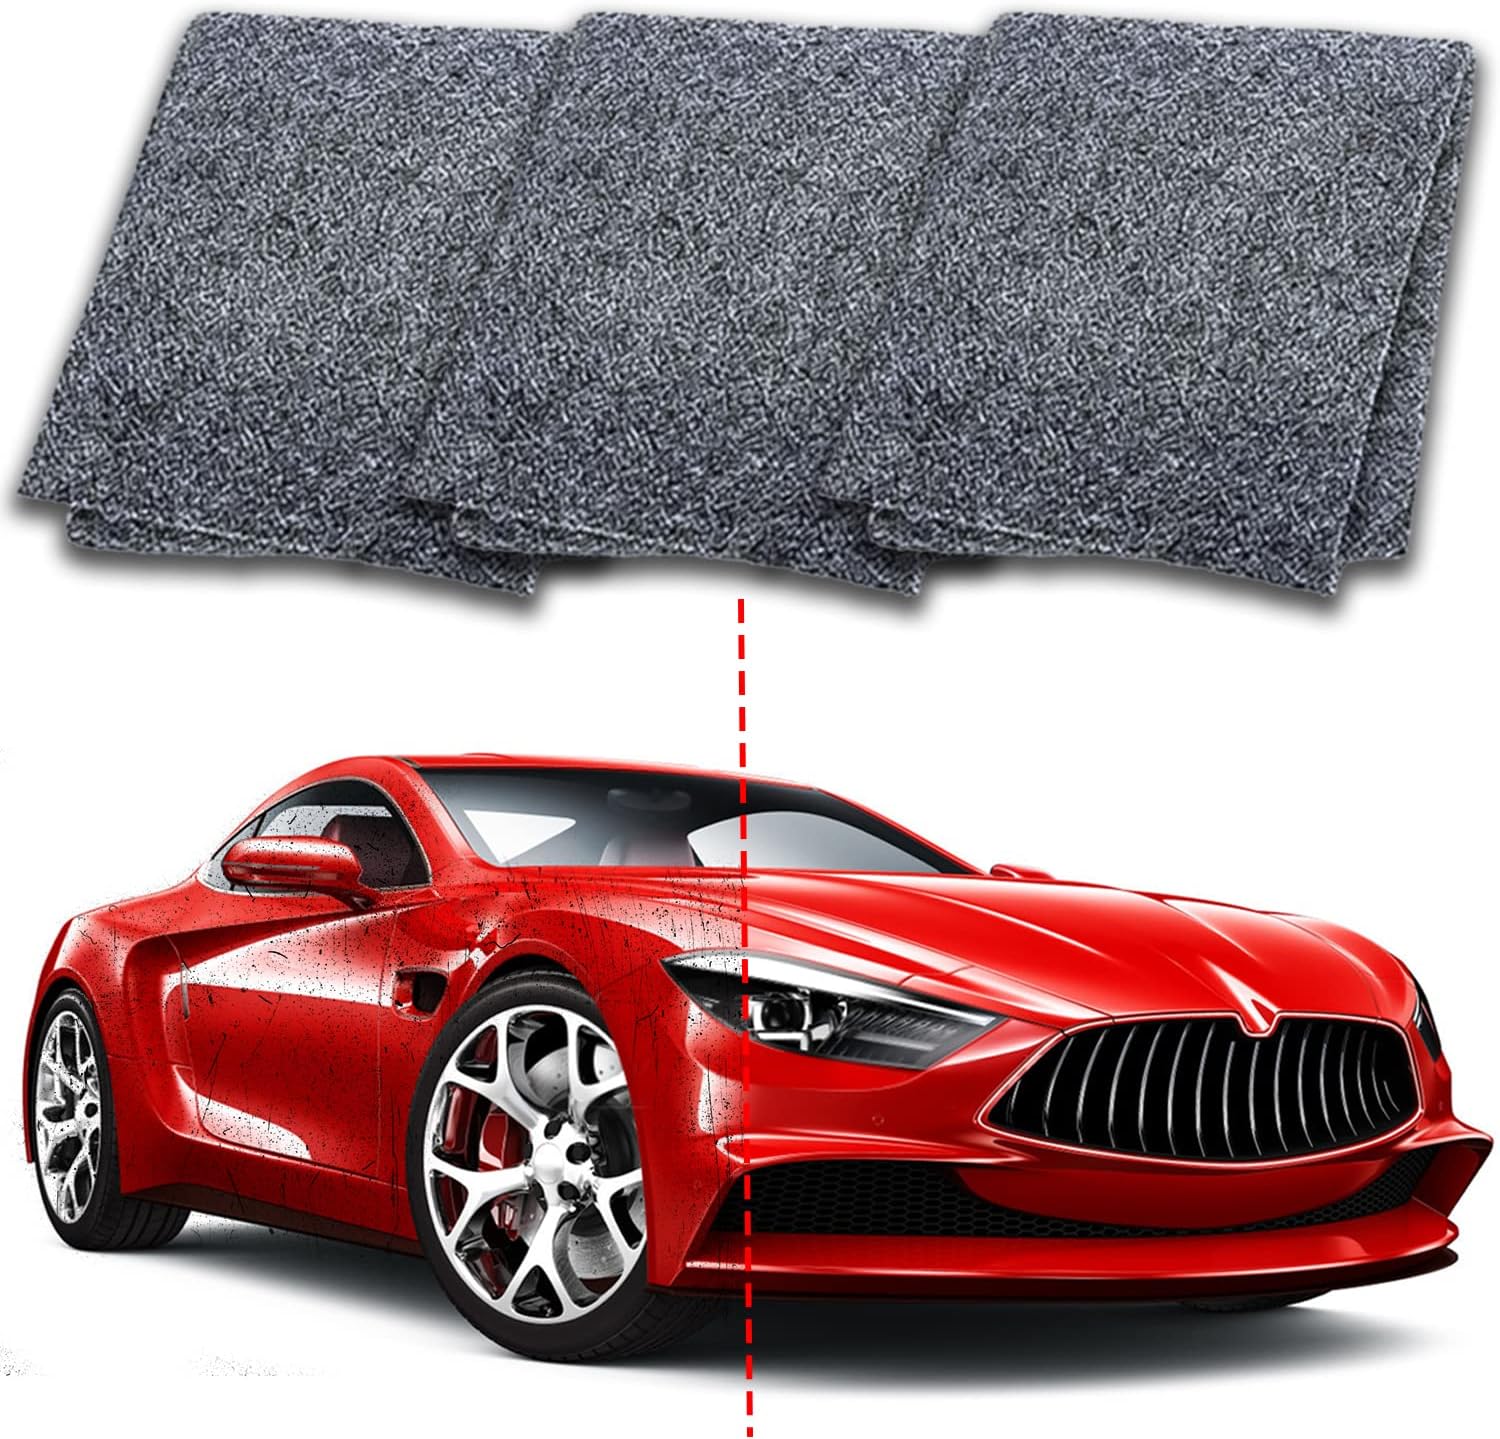 UNIIOON Nano Sparkle Cloth for Car Scratches, Upgrade Nano Magic Car Scratch Remover Cloth with Scratch Repair and Water Polishing, Car